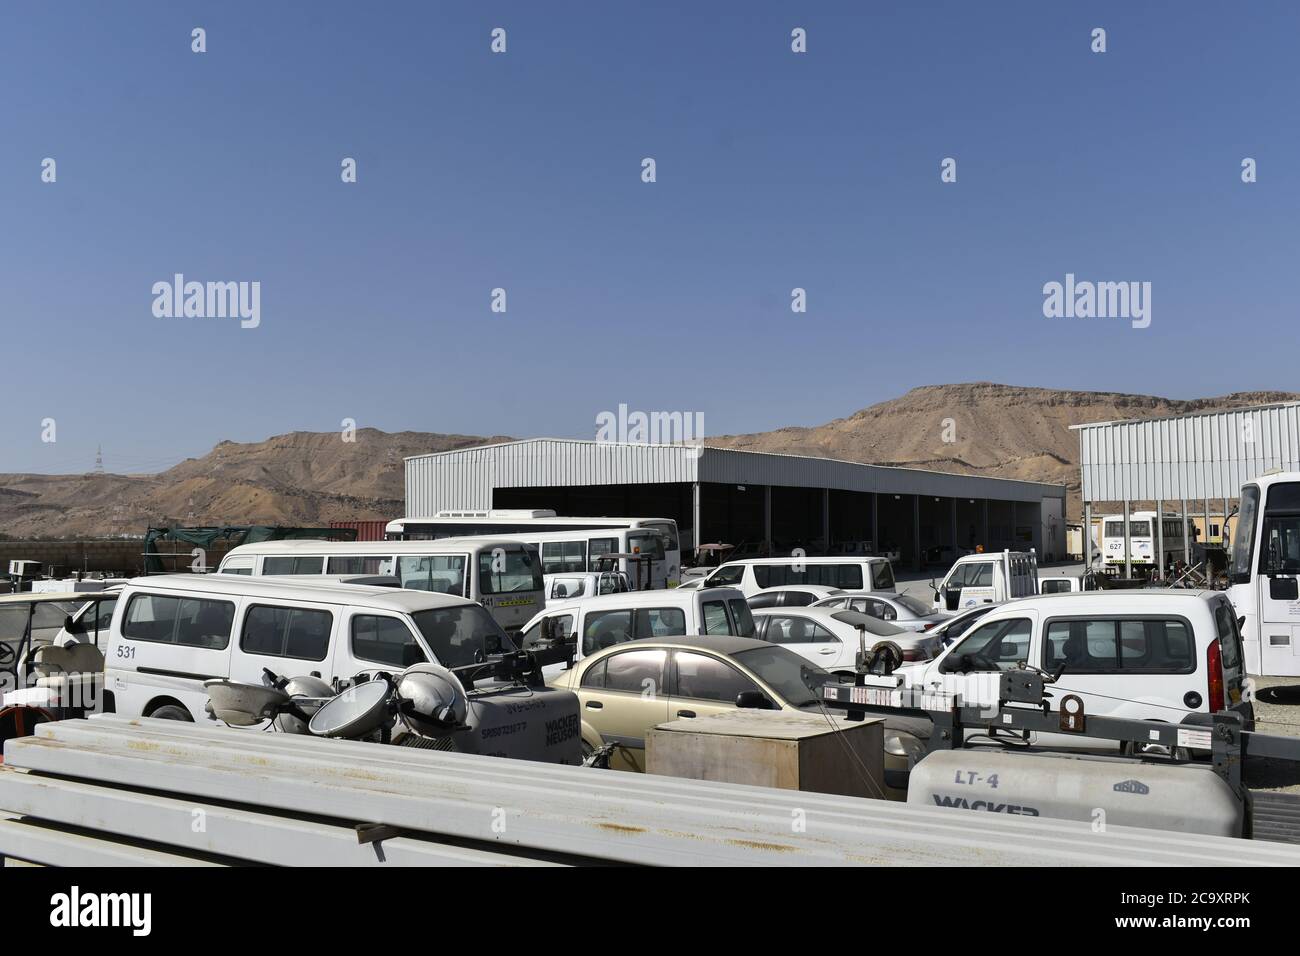 Muscat, Oman - 08-08-2020 : Industrial Wastages and scrabs in the workshop Stock Photo